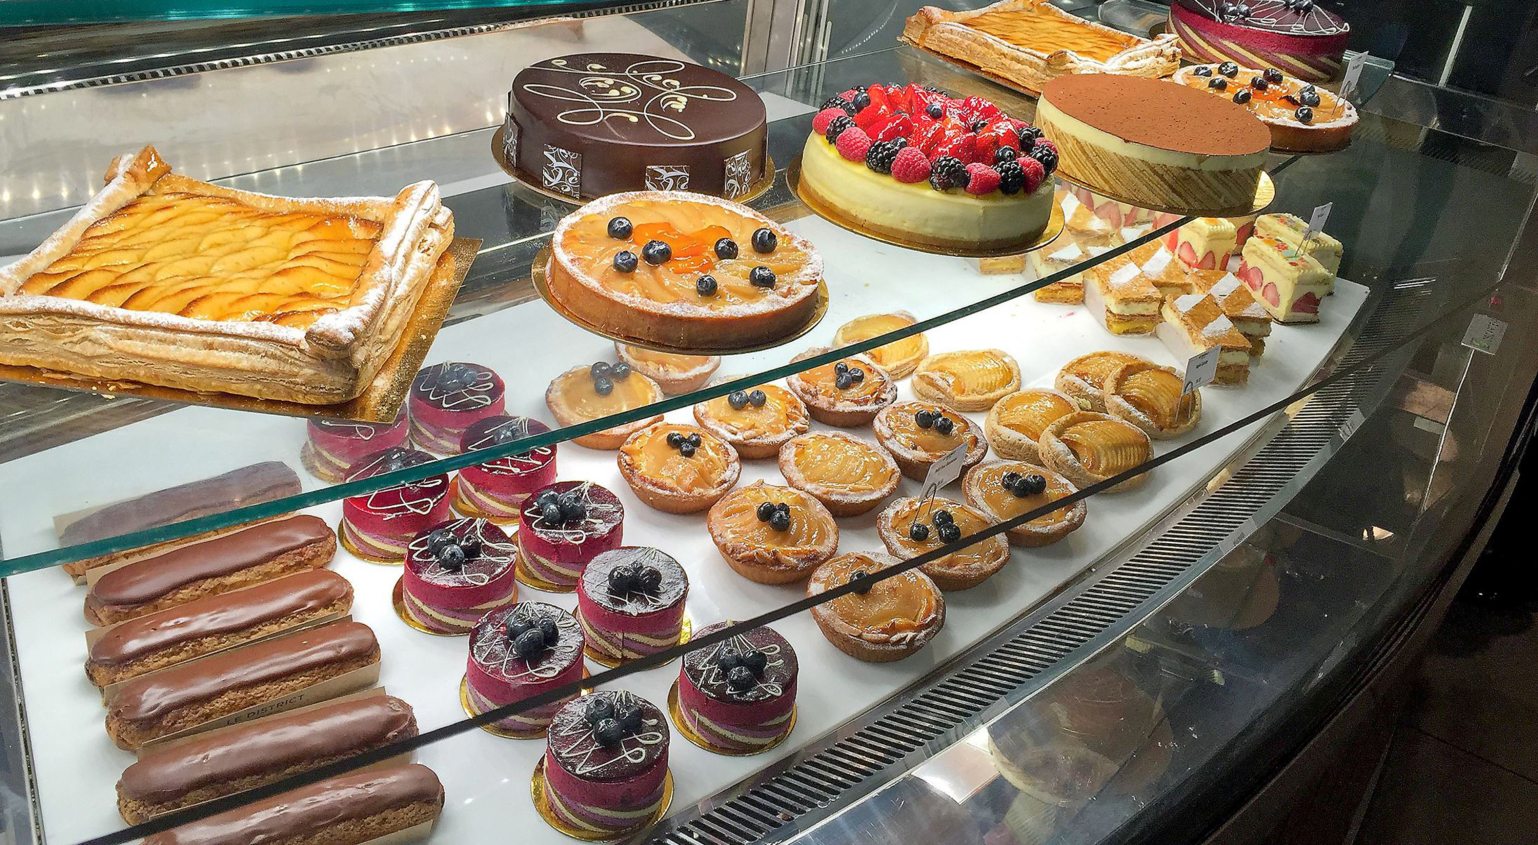 Delectable desserts are among the many food options on site at Brookfield Place, a luxury shopping center in Battery Park City in lower Manhattan.